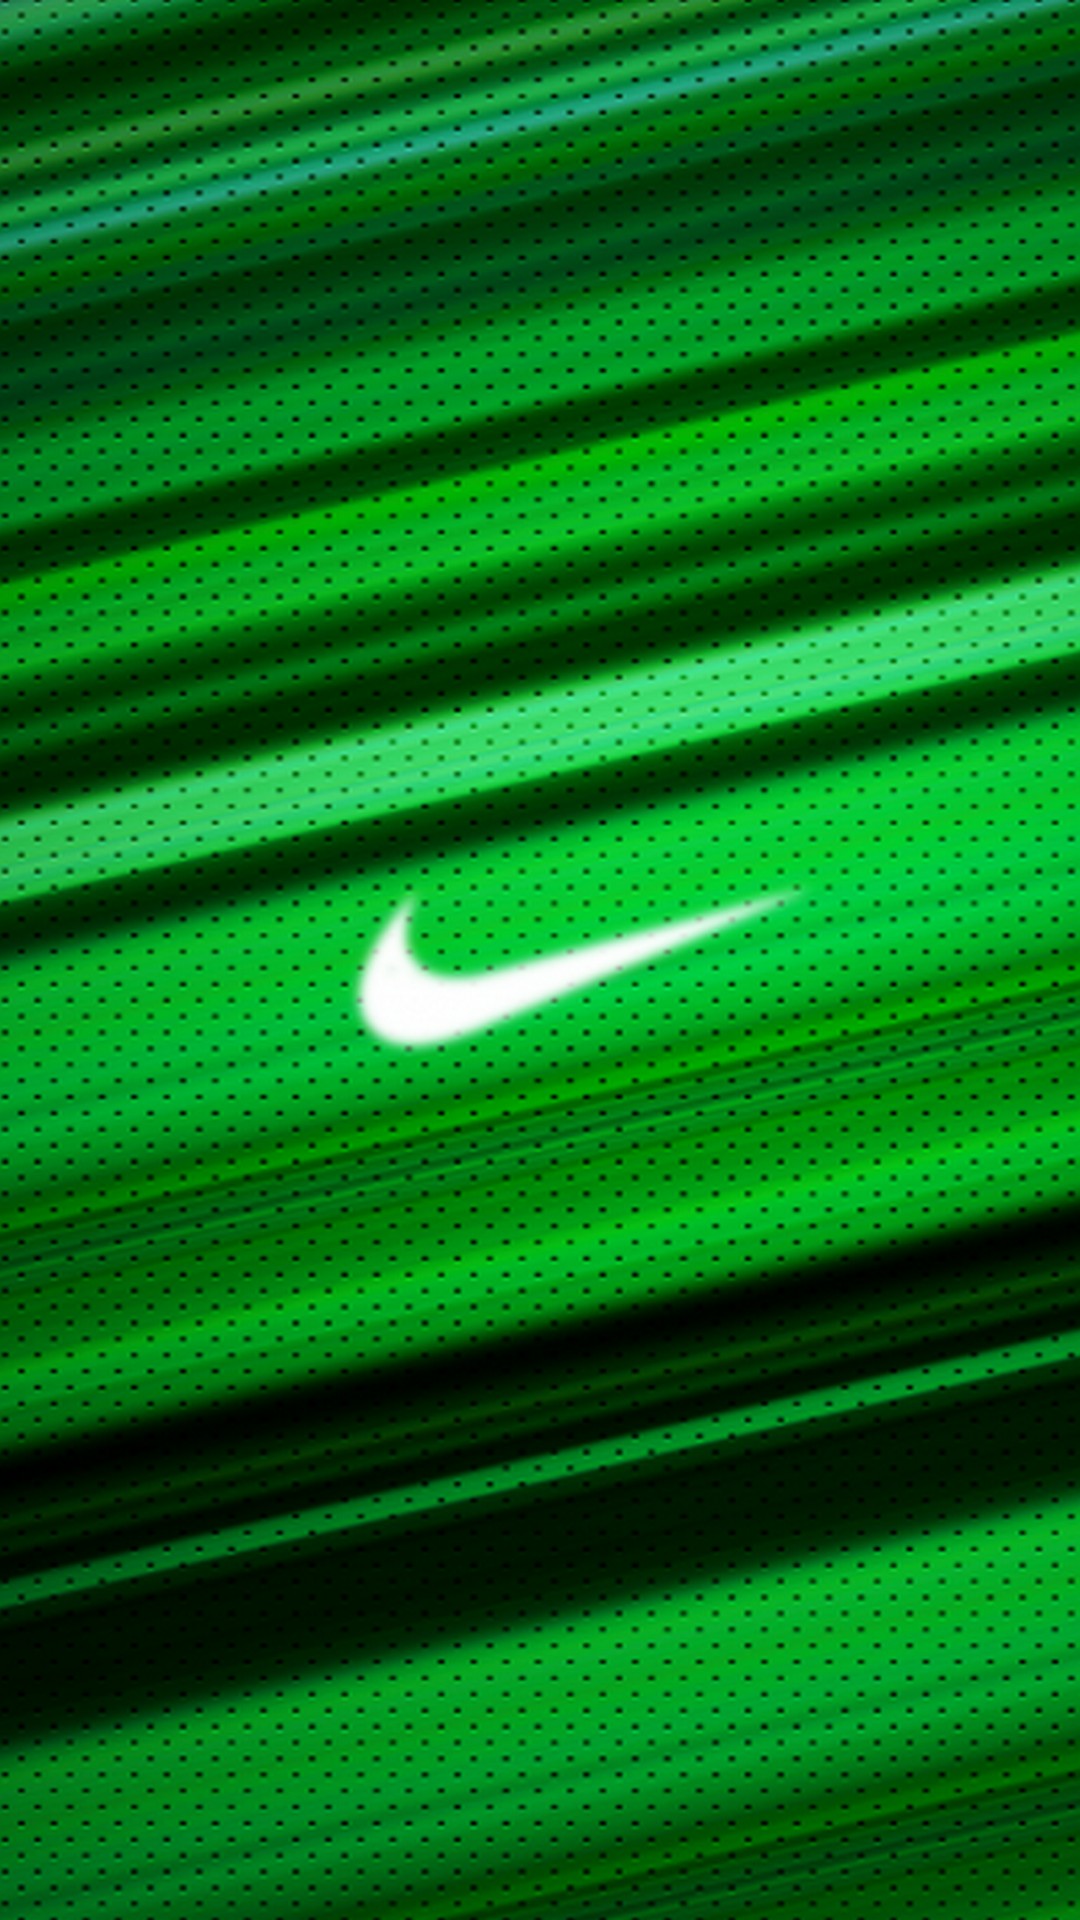 Android Wallpaper HD Neon Green with image resolution 1080x1920 pixel. You can make this wallpaper for your Android backgrounds, Tablet, Smartphones Screensavers and Mobile Phone Lock Screen